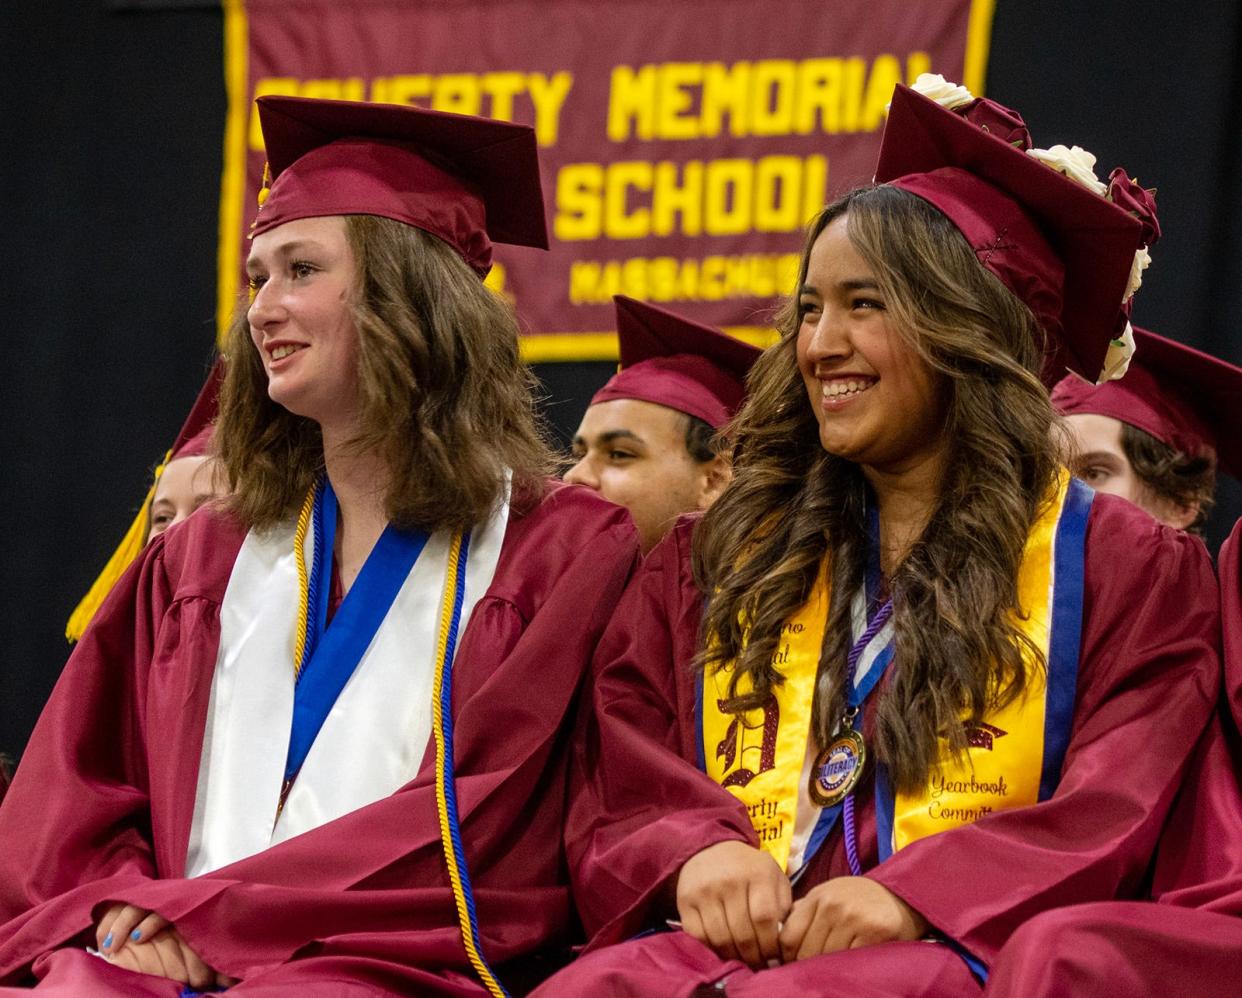 Valedictorian Nellie Ann Rushton, left, and senior class president Layla Cristina Zambrano react to a speaker during the Doherty Memorial High School commencement exercises at the DCU Center Wednesday.